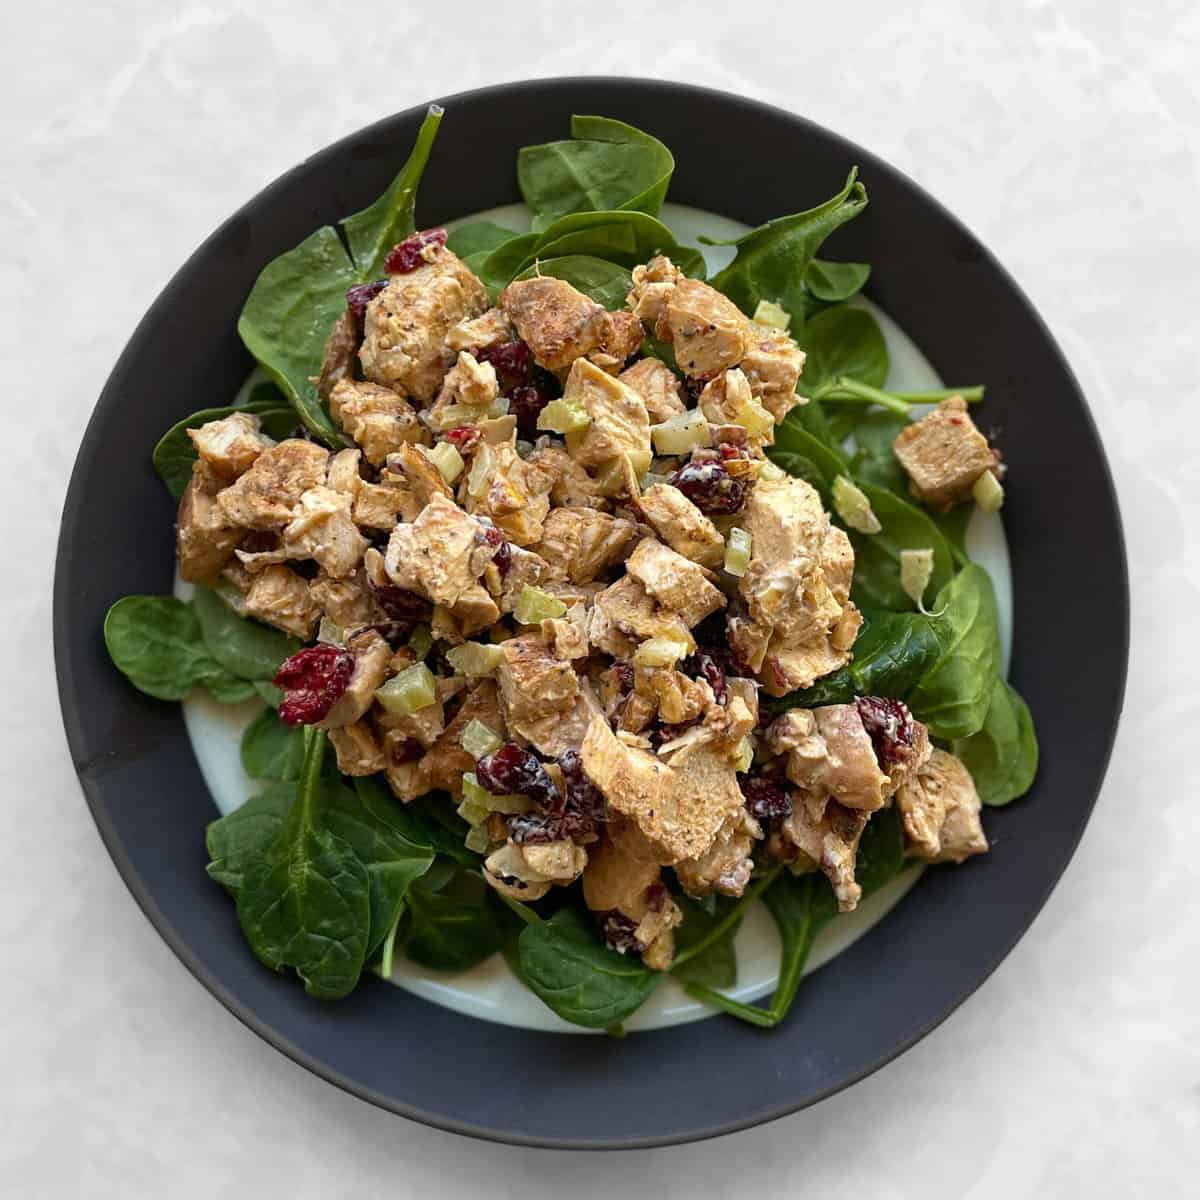 cranberry pecan chicken salad on a plate of baby spinach.